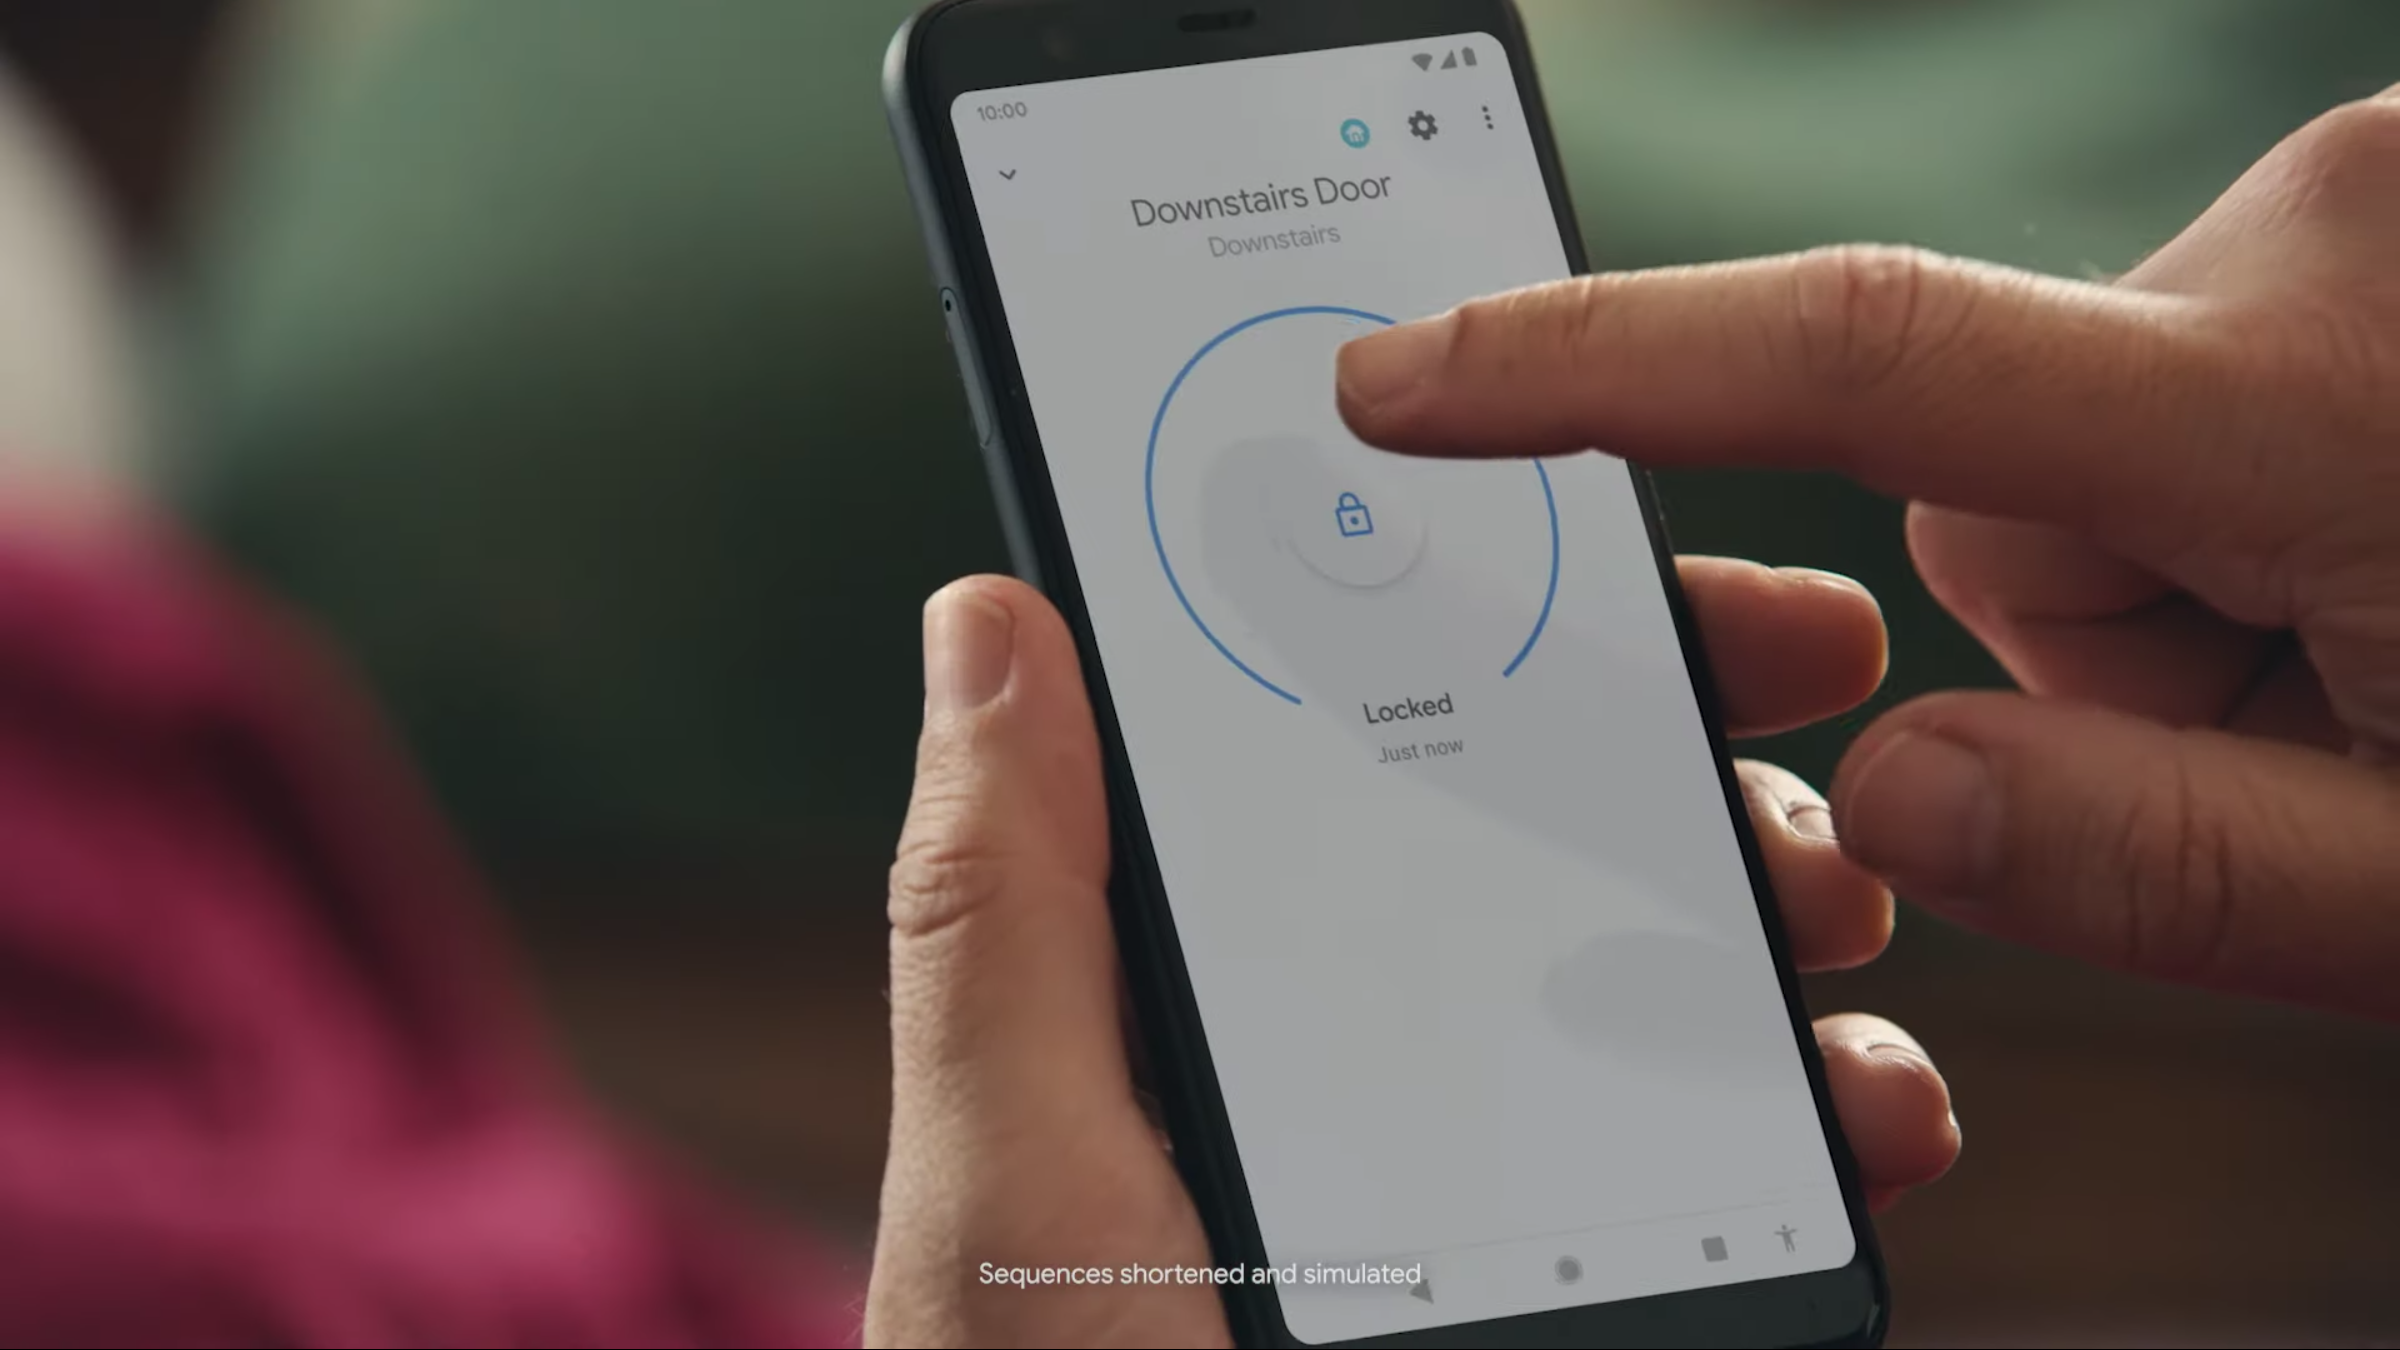 Google promo shows you could soon open Nest smart locks straight from the Home app